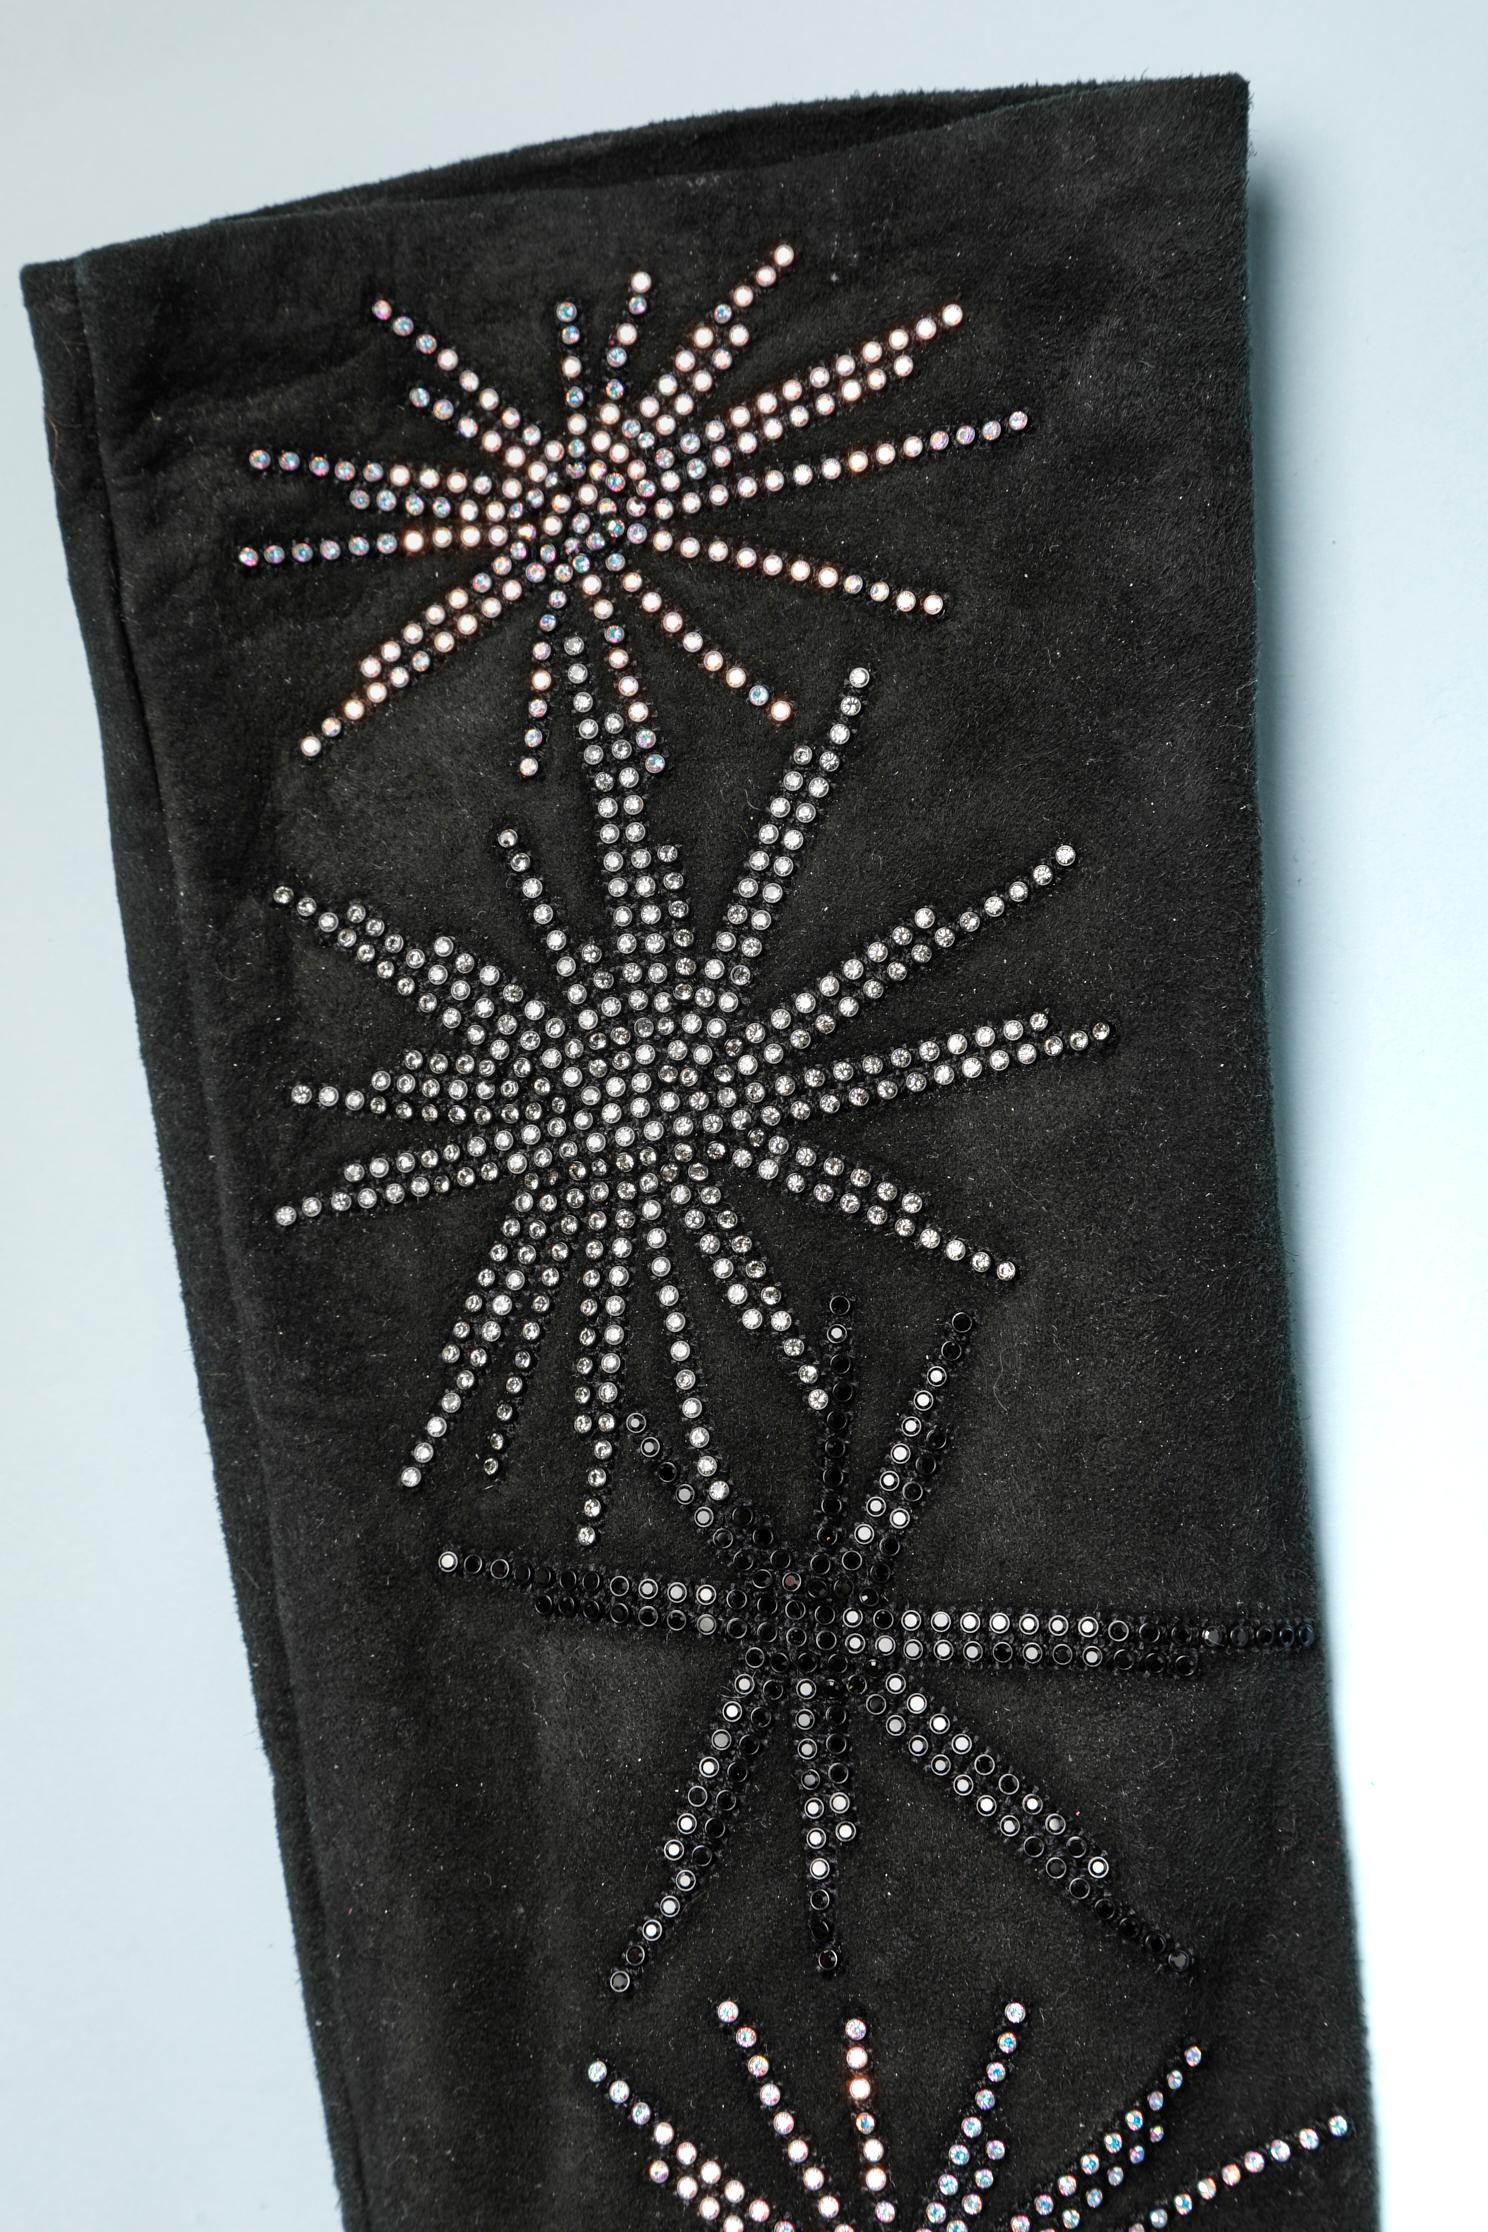 Evening gloves in black suede and rhinestone with silk lining.
One of a kind / prototype 